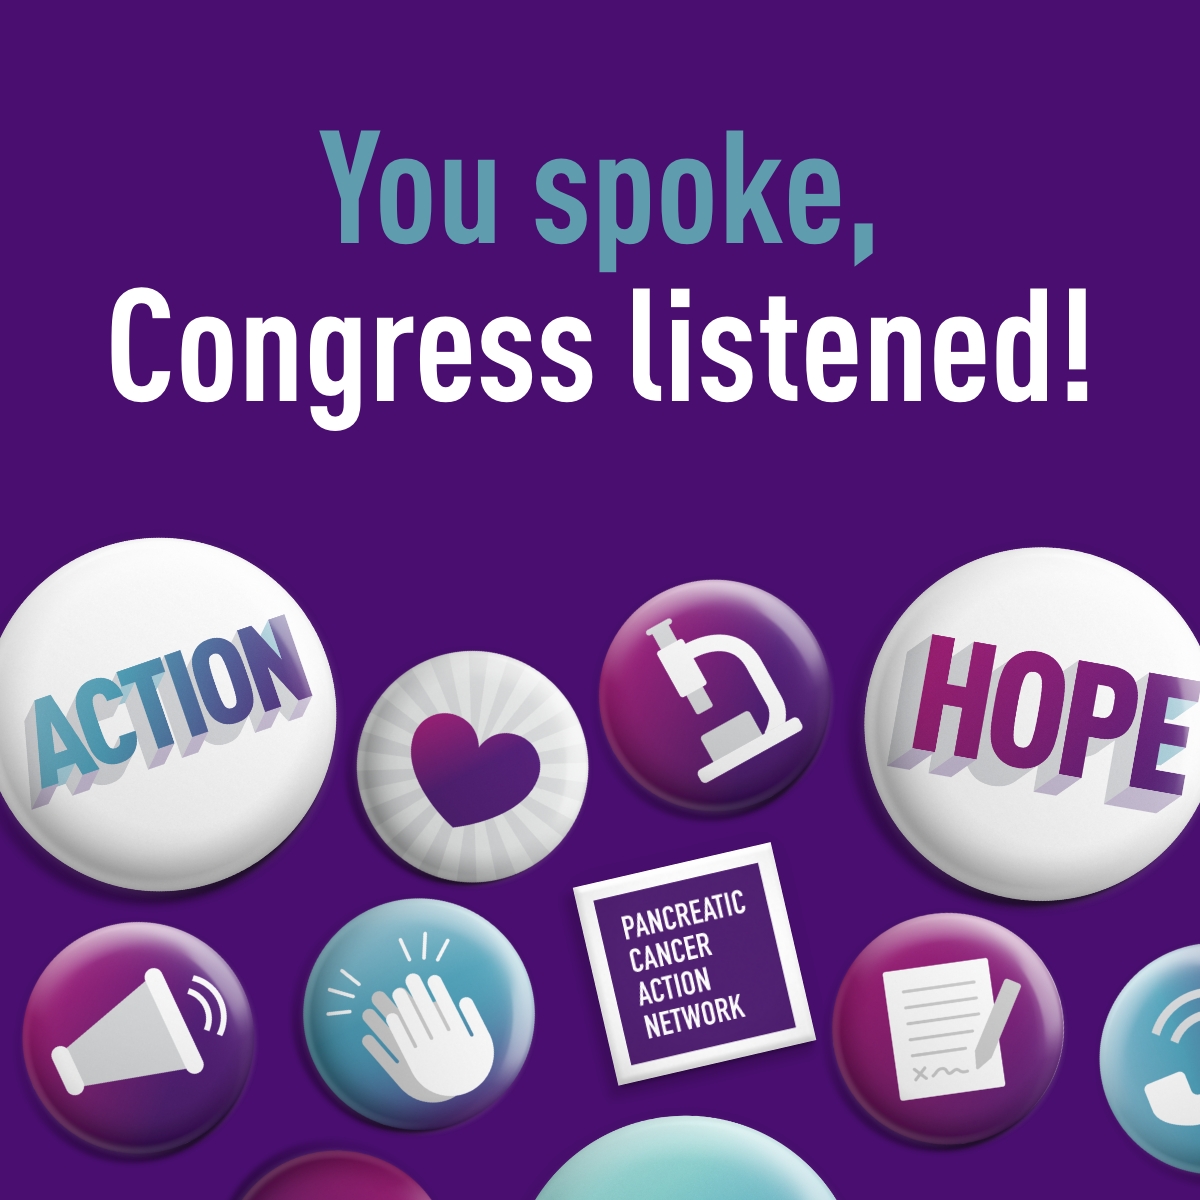 Advocacy WORKS! 📣 PanCAN advocates recently contacted members of Congress urging them to sign their names in support of $25 million in federal funding for dedicated #pancreaticcancer research. 💜 Because of those efforts, a record number of members signed on – a tremendous first